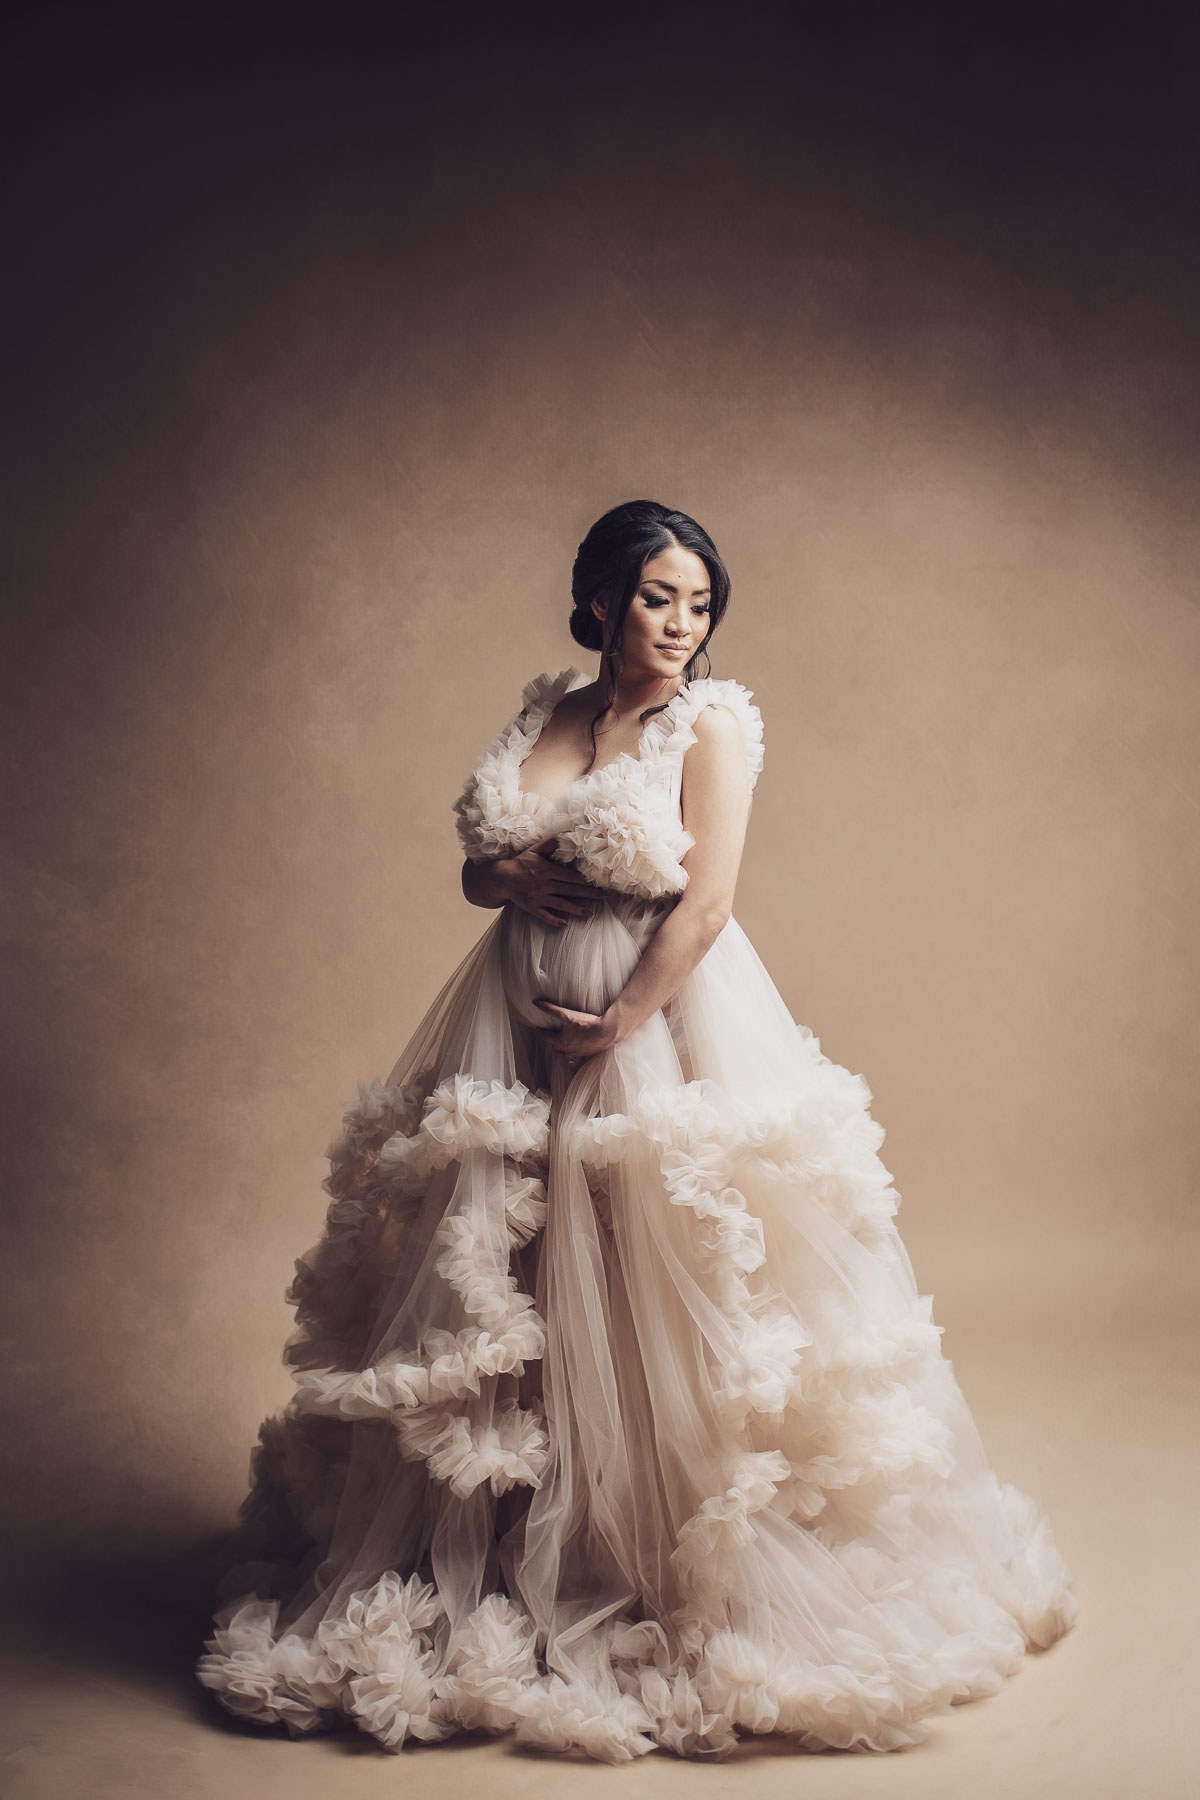 fine art studio lighting maternity photo with beautiful blush color couture gown